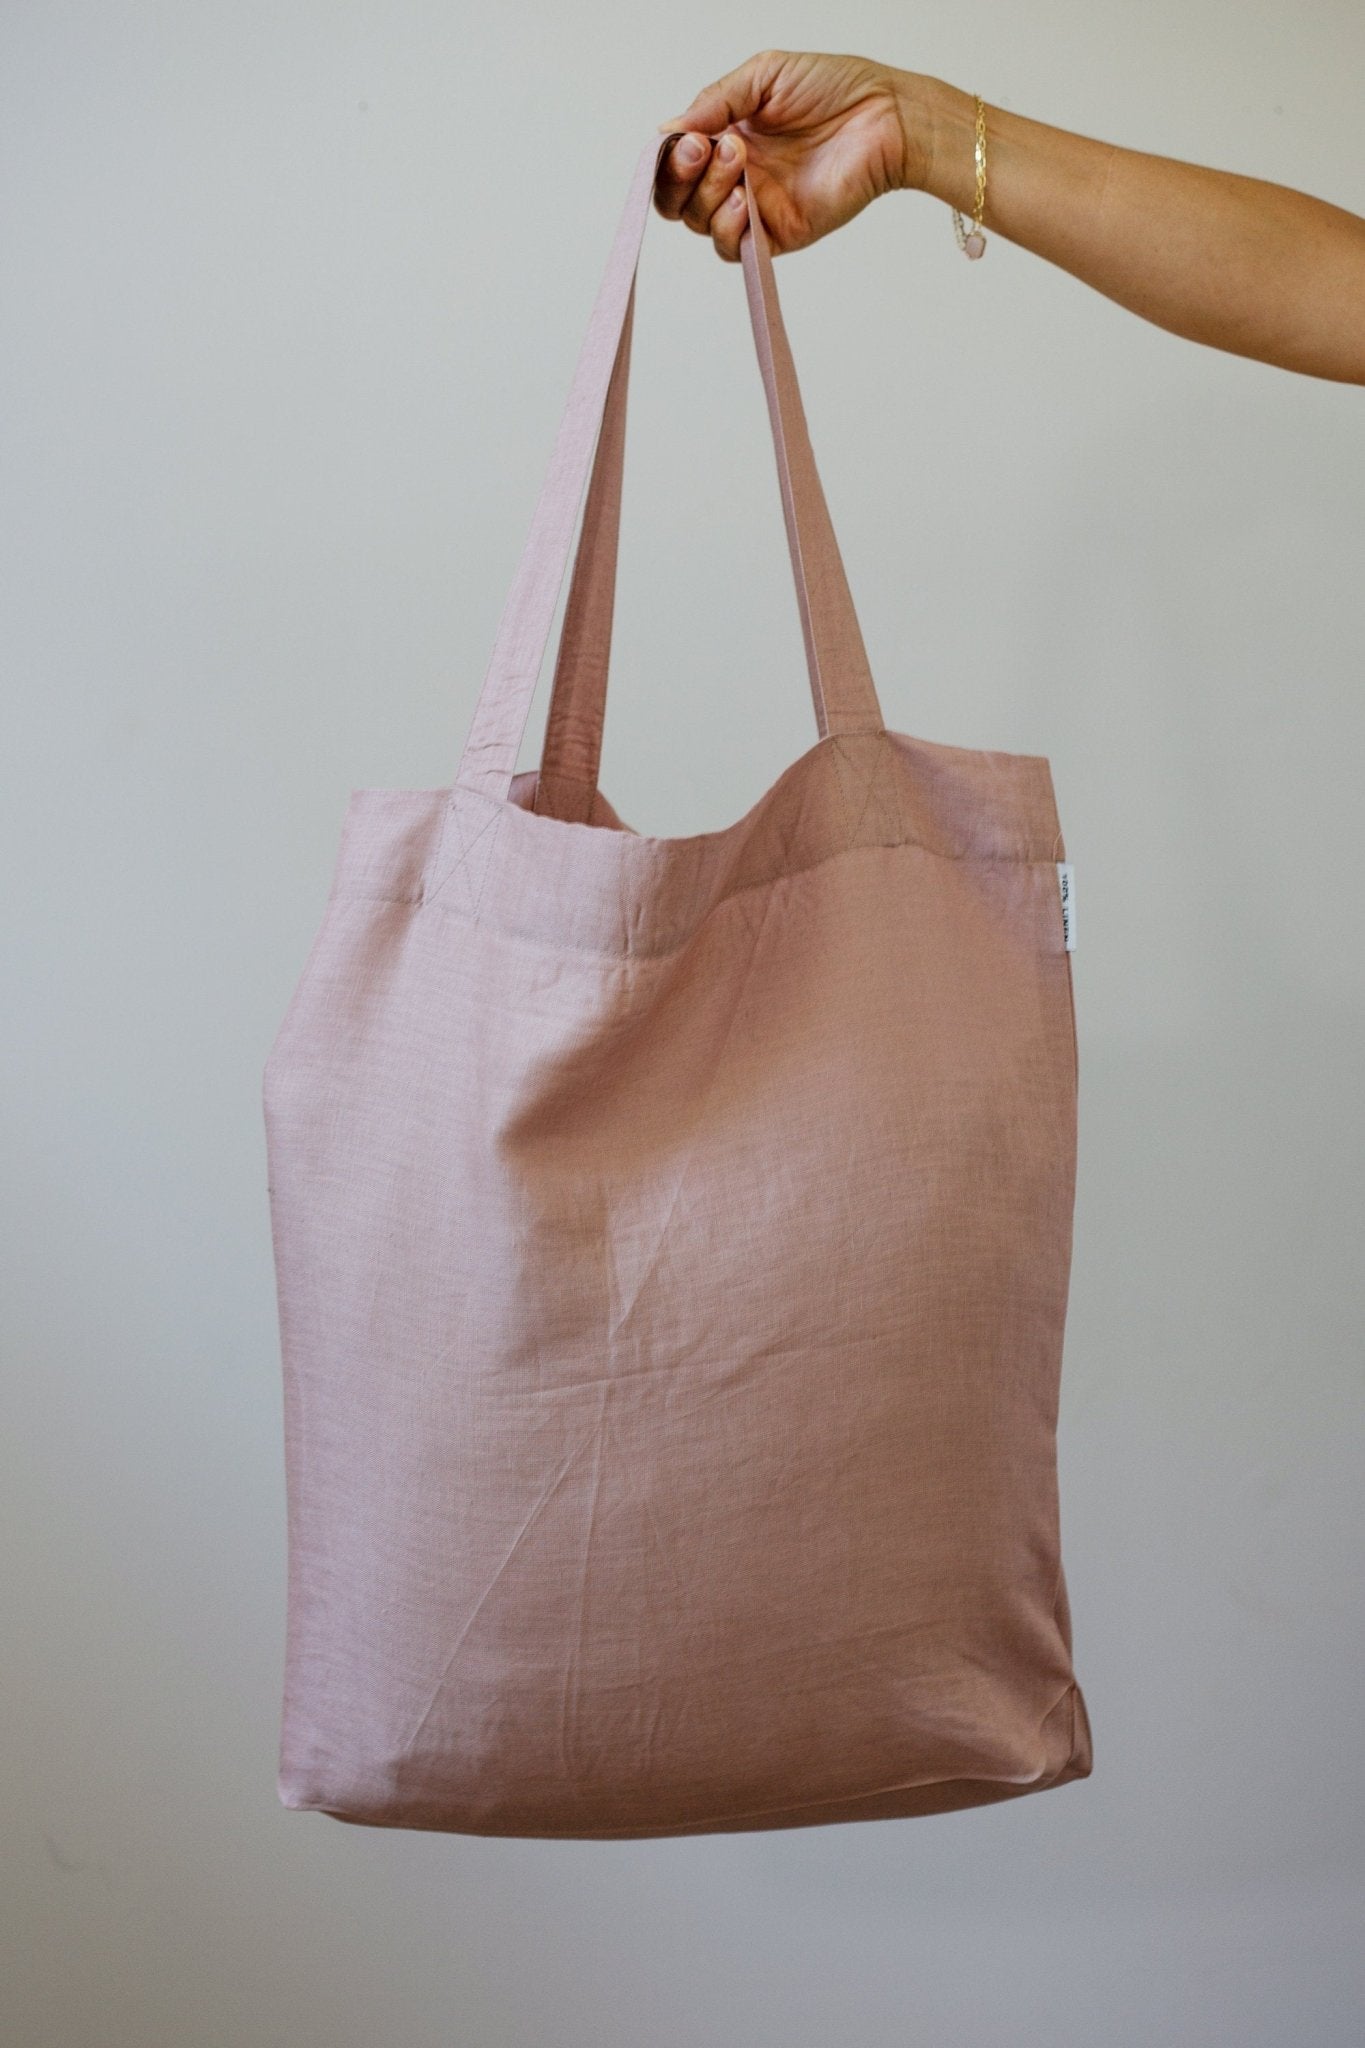 Load image into Gallery viewer, Large Linen Tote Bag | Shopping Tote Bags | Linen Tote Bags | Bridesmaid Gift Bags | Personalized Monogram Tote Linen Shopping Bag | Eco Bag
